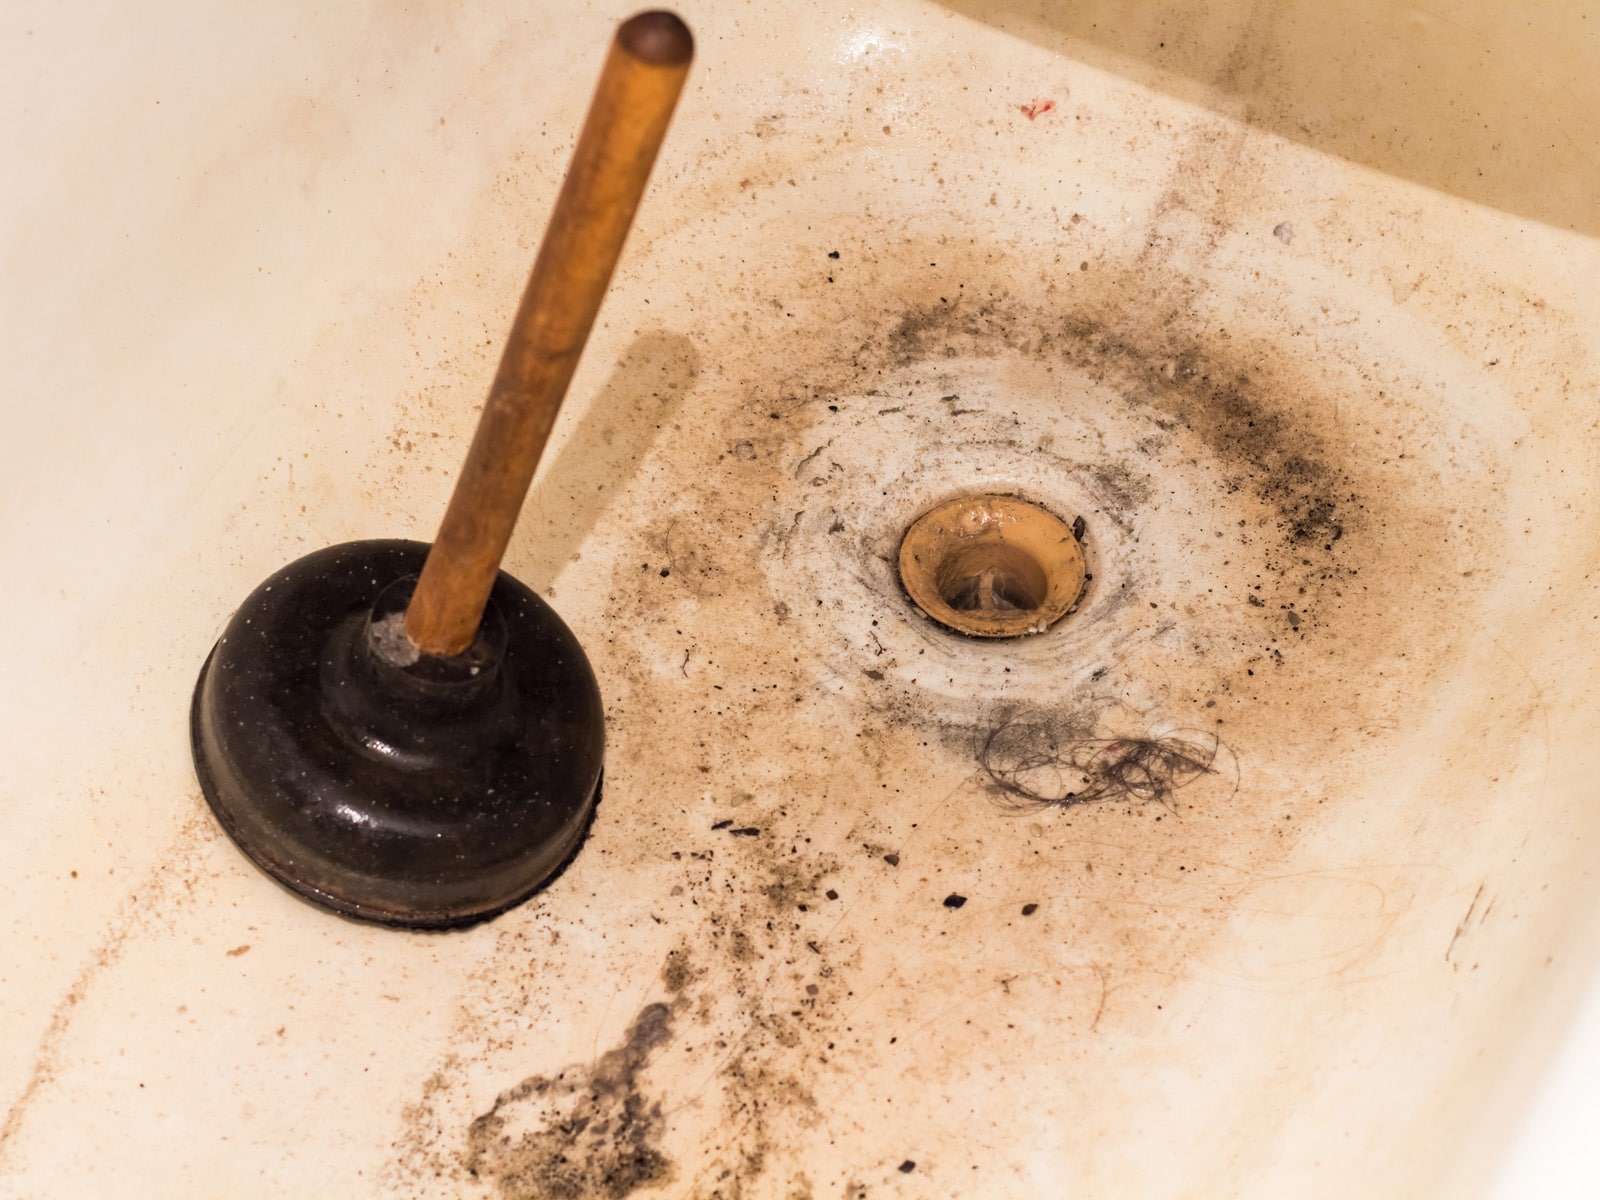 A plunger inside a shower to clean a shower drain.